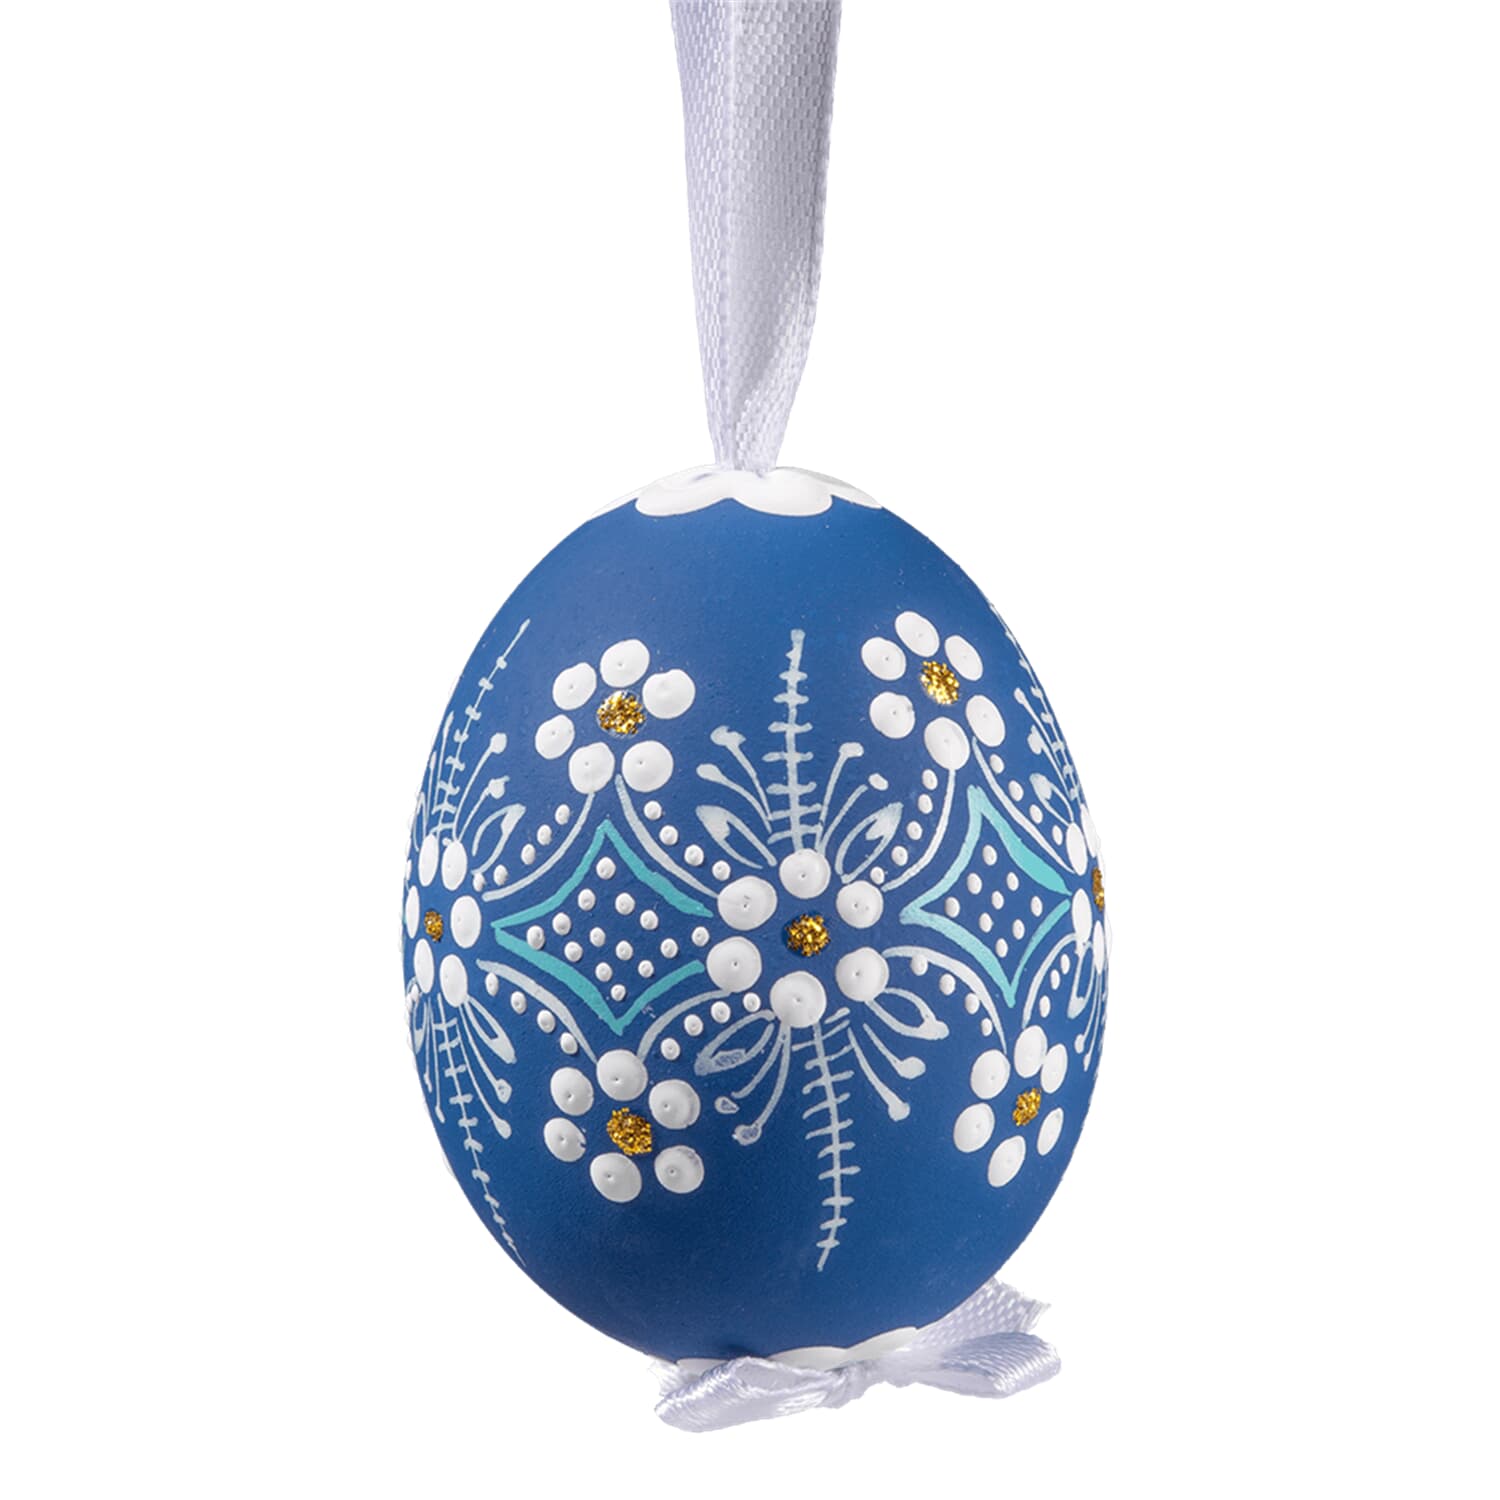 Easter egg, Blue Dotted Easter Egg with Pink Bow, blue and white